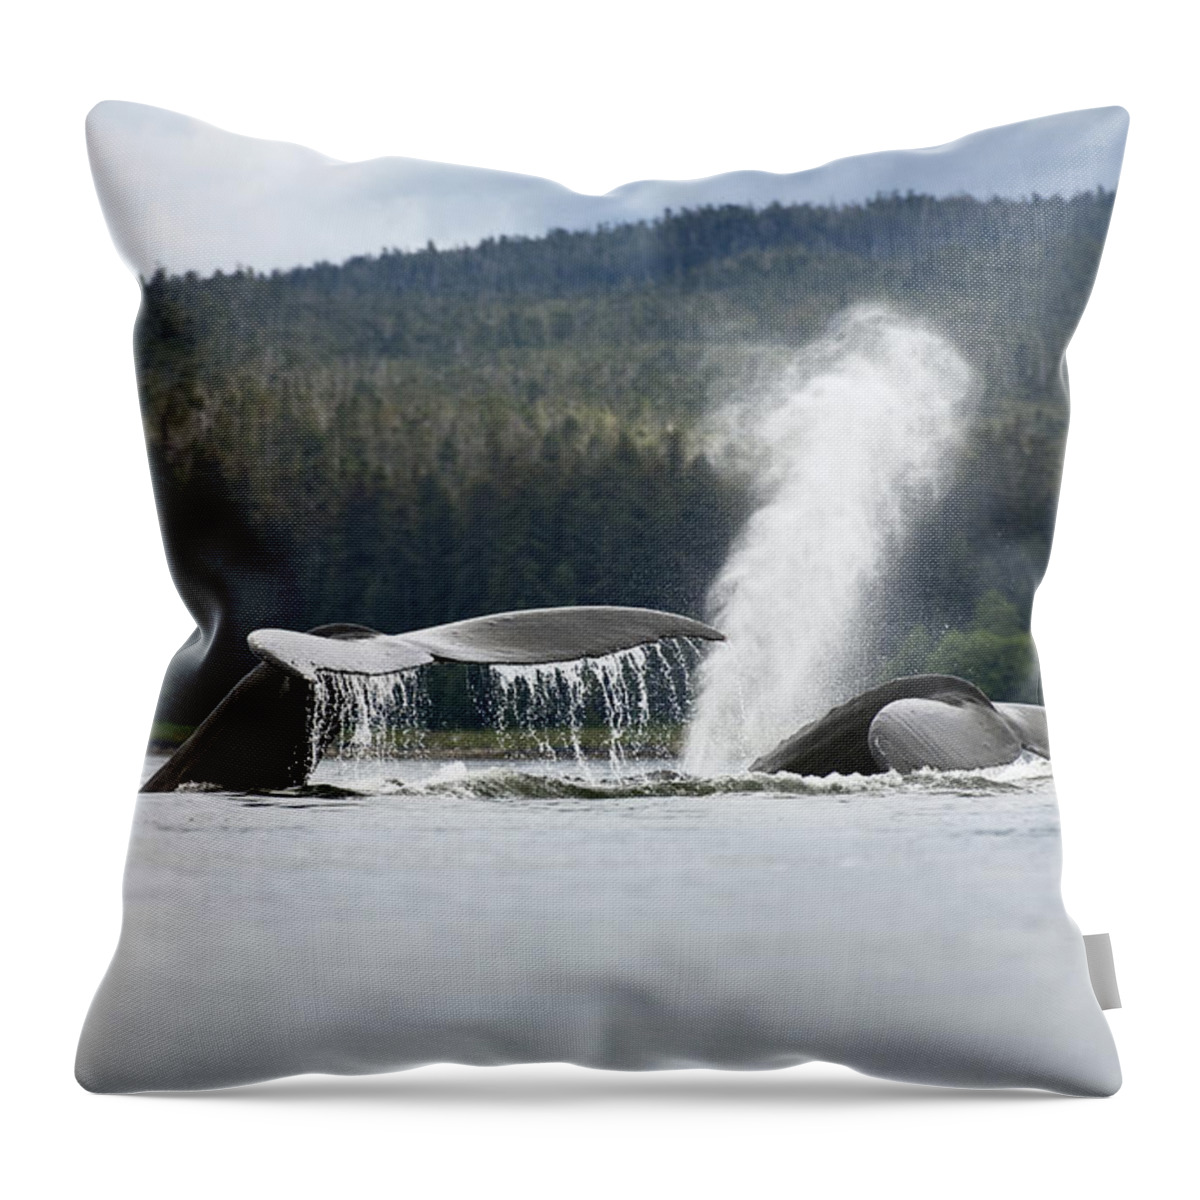 Mp Throw Pillow featuring the photograph Humpback Whale Megaptera Novaeangliae #2 by Konrad Wothe